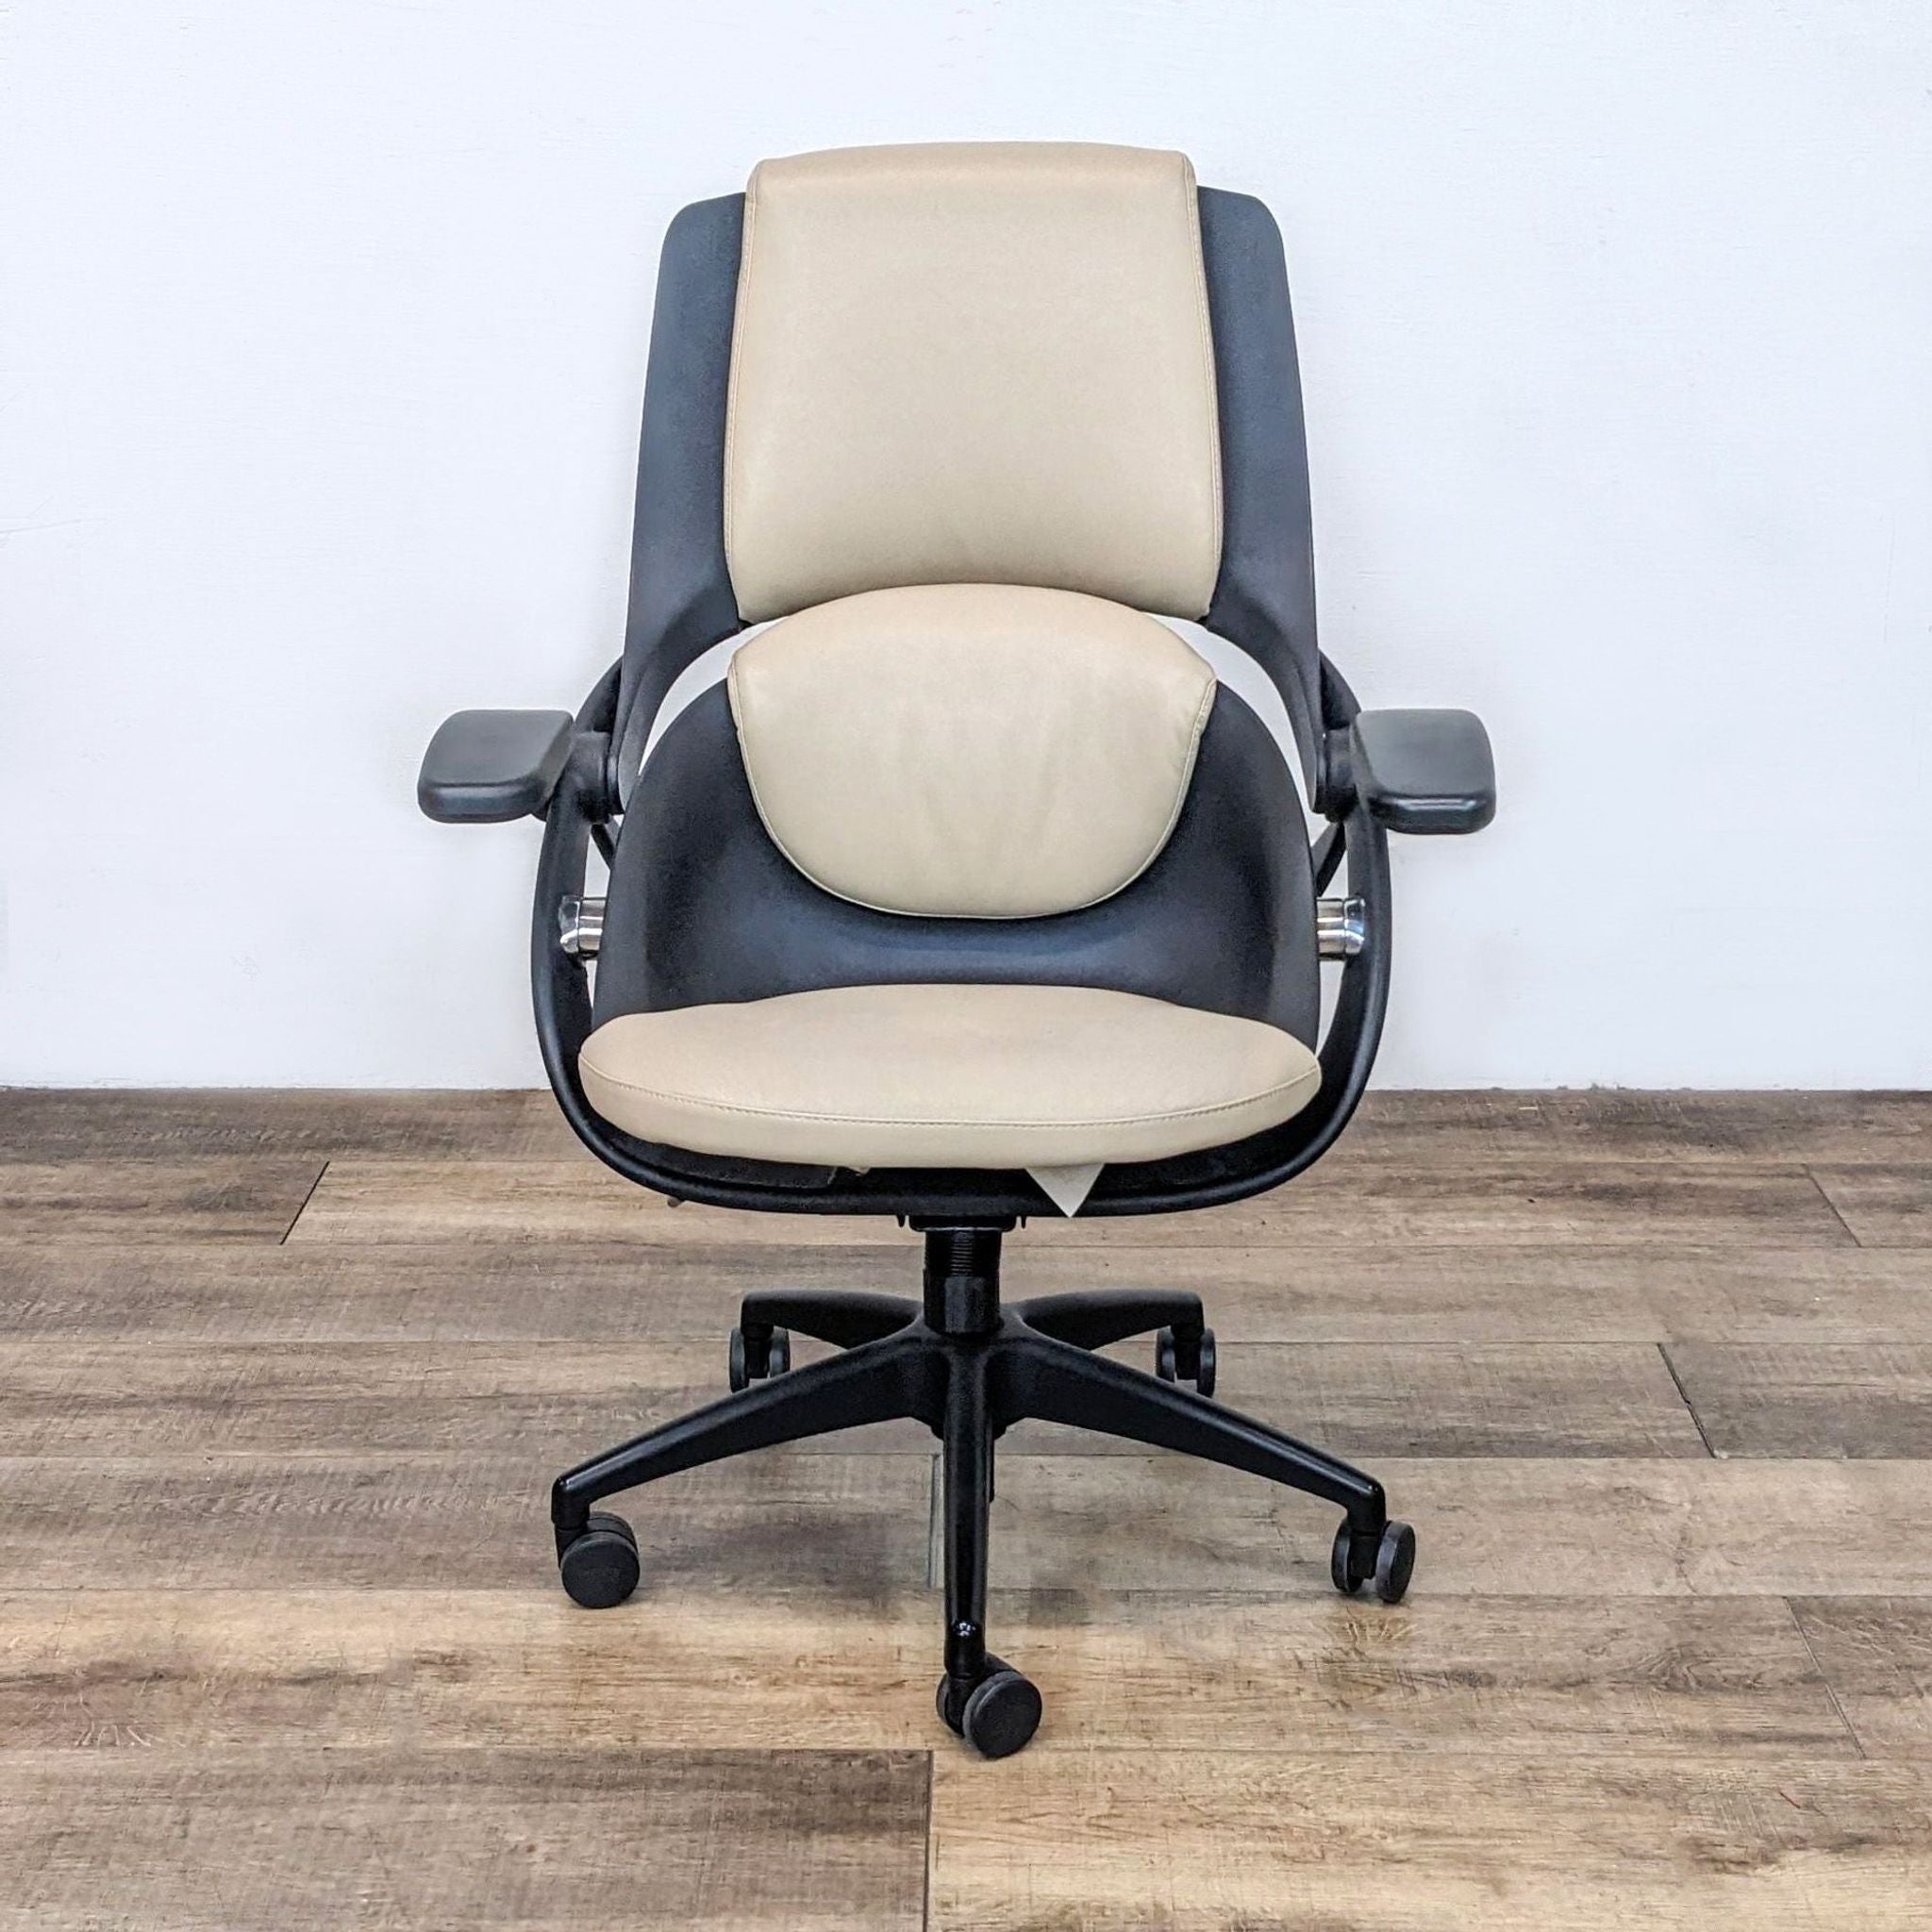 All33 Axion chair with lumbar support and Sit in Motion technology, vegan leather upholstery, loose arm visible.